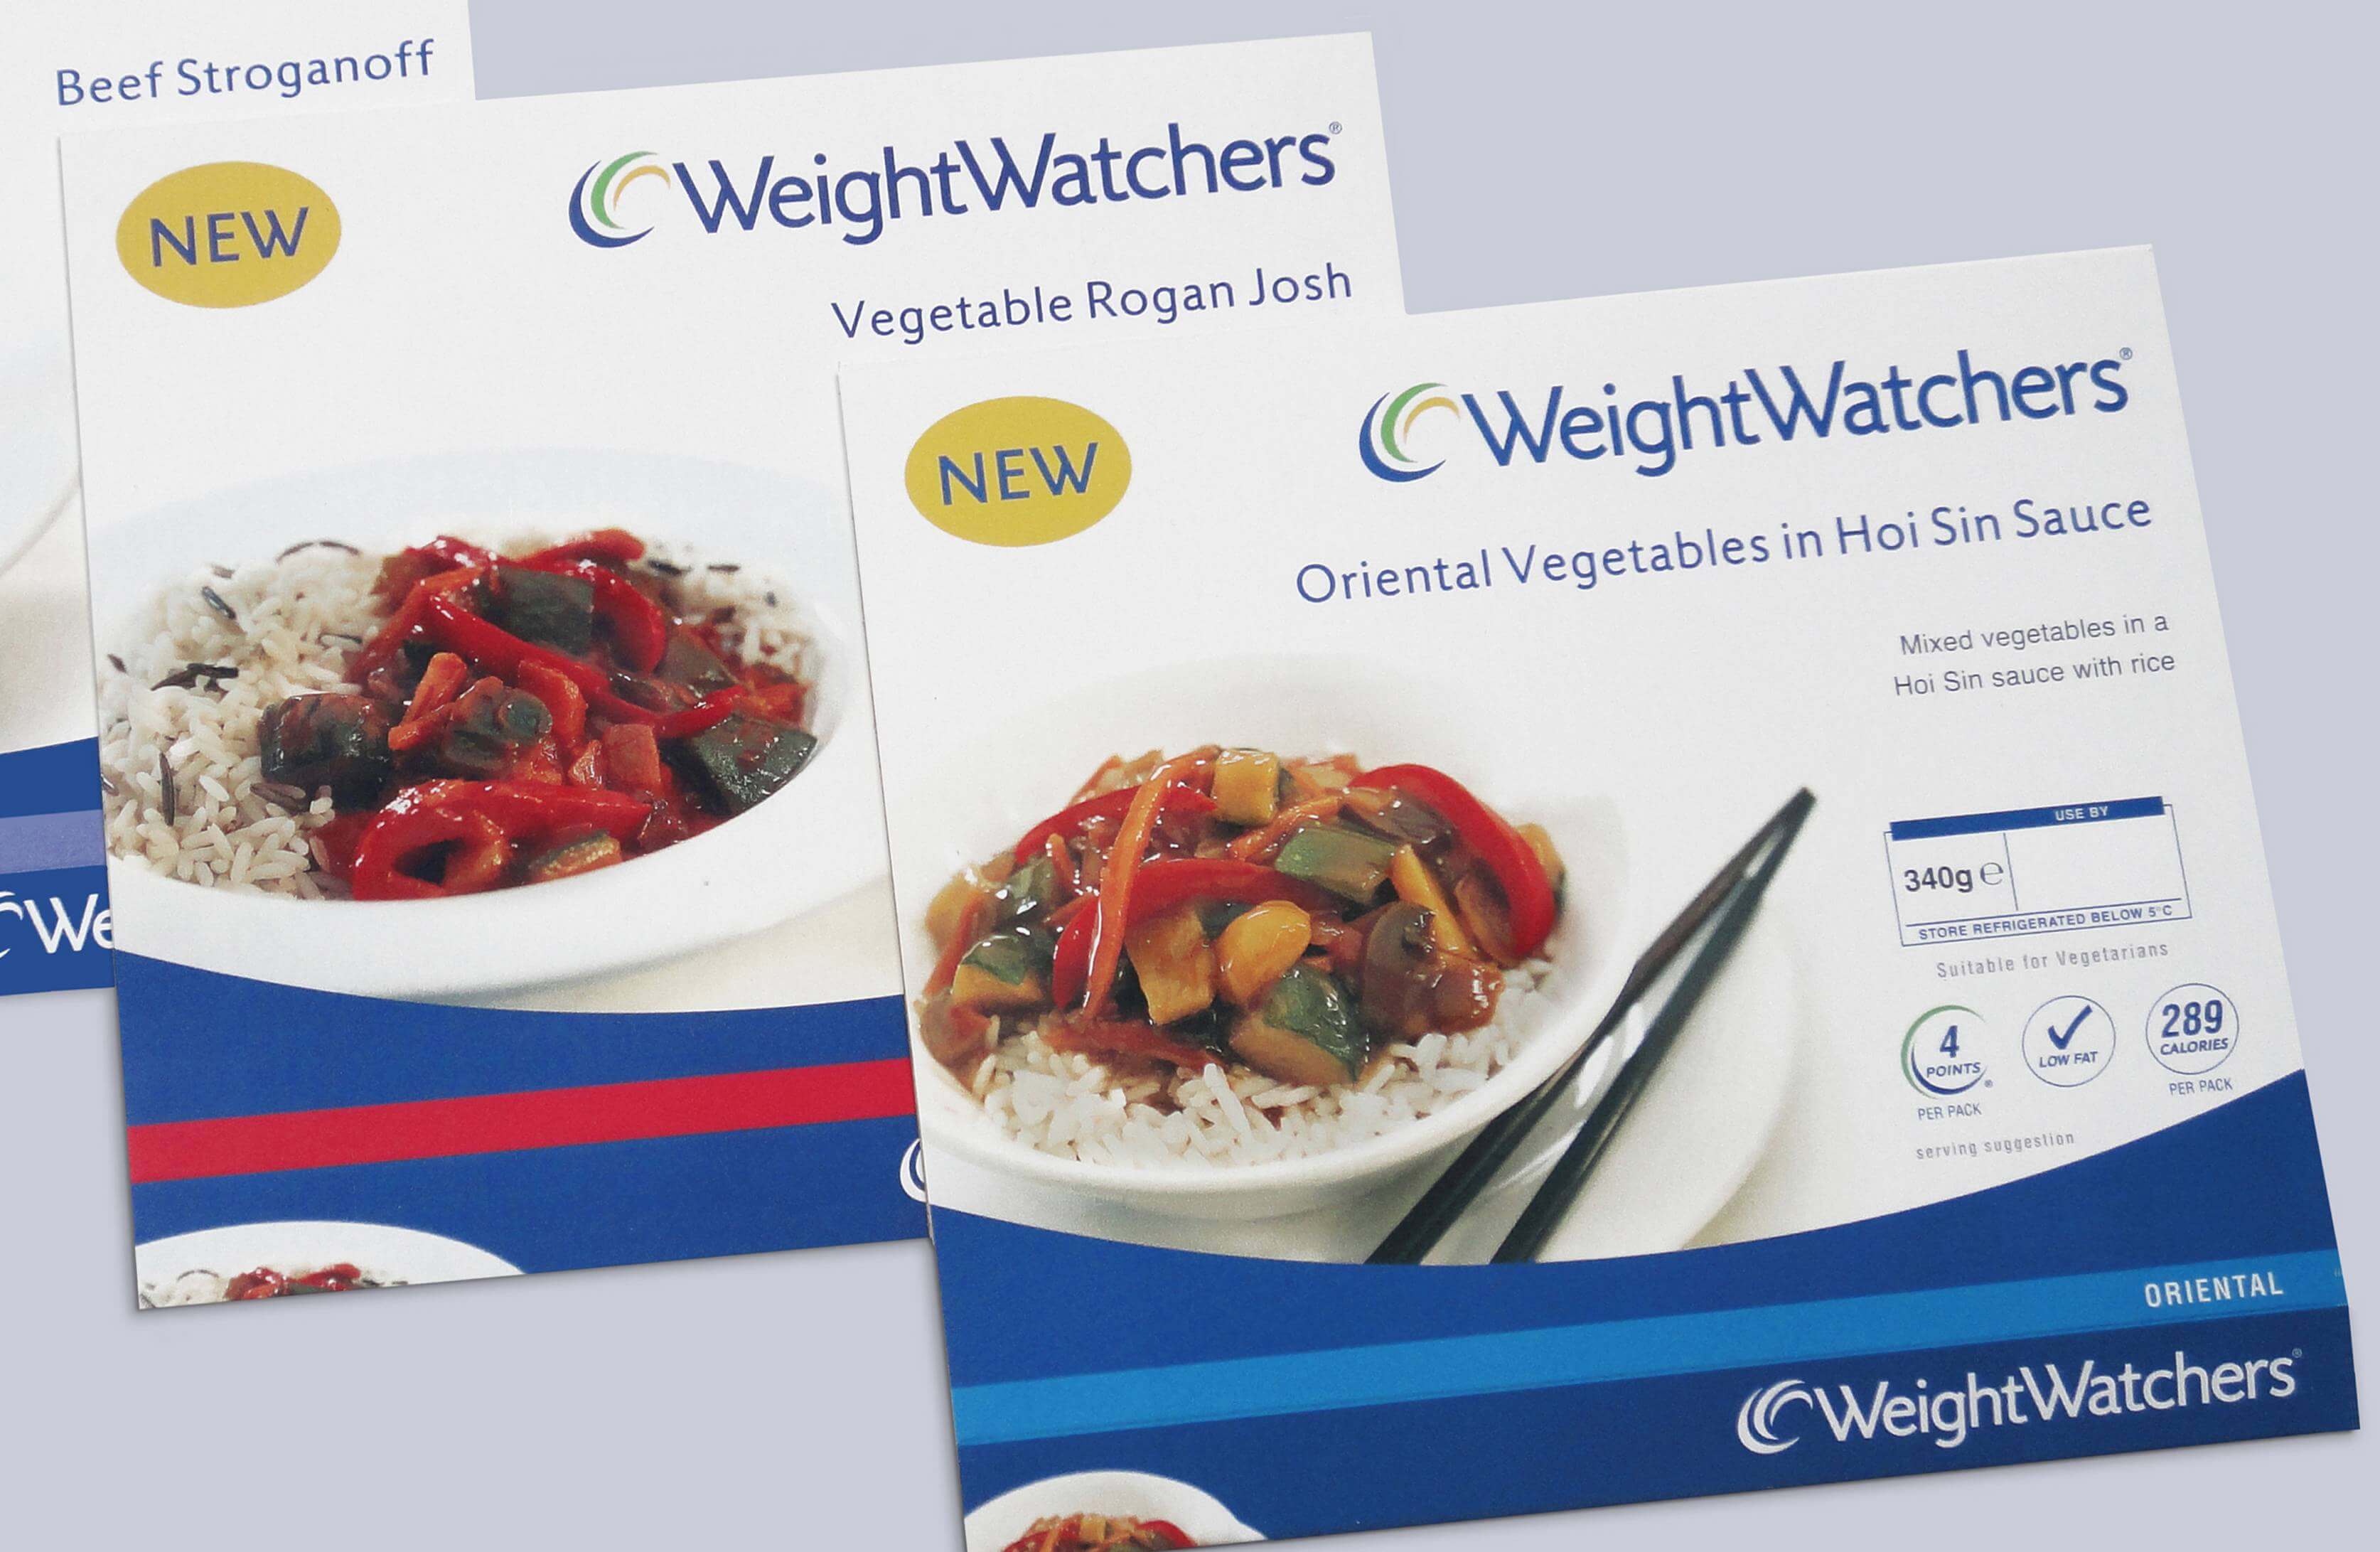 WeightWatchers Packaging designed by Glasgow-based graphic design studio, G3 Creative.